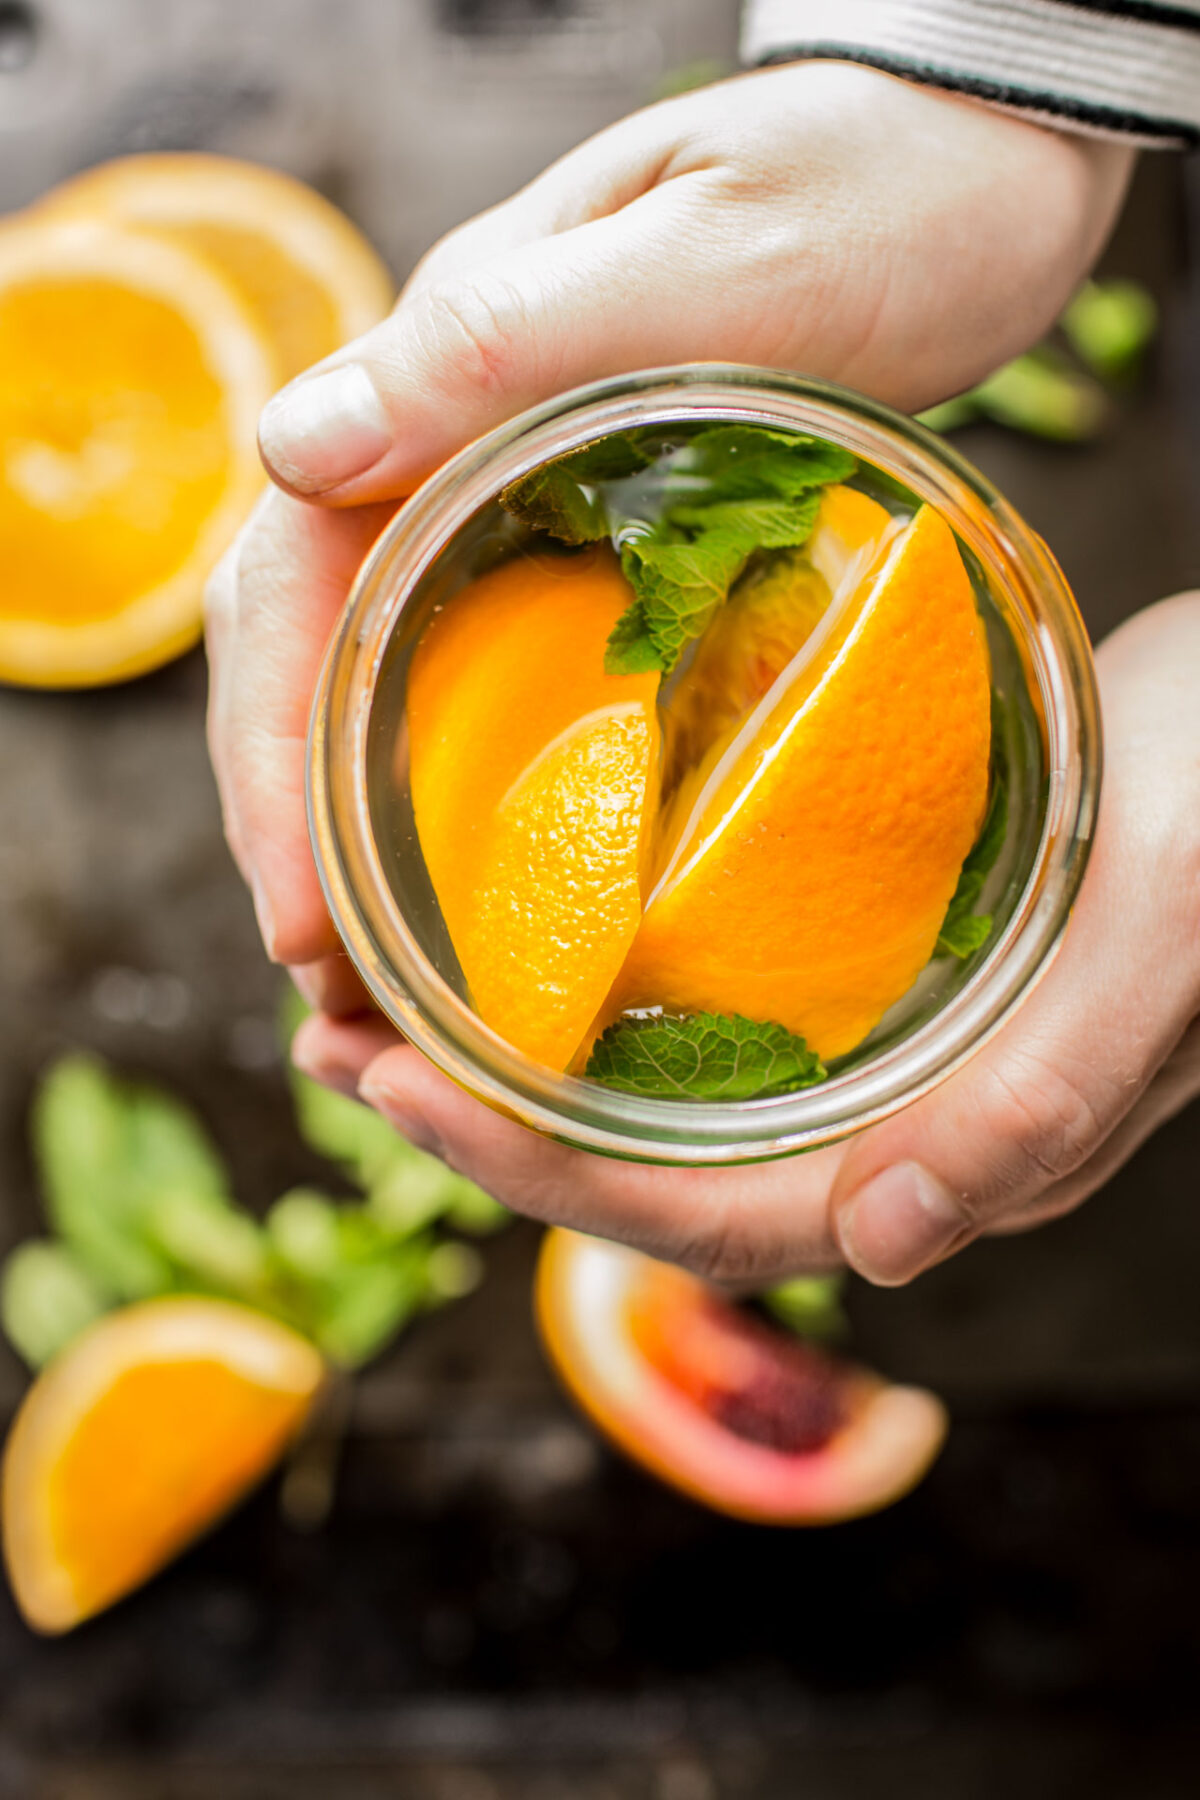 A woman's hands holding a glass jar filled with orange slices and fresh mint sprigs.